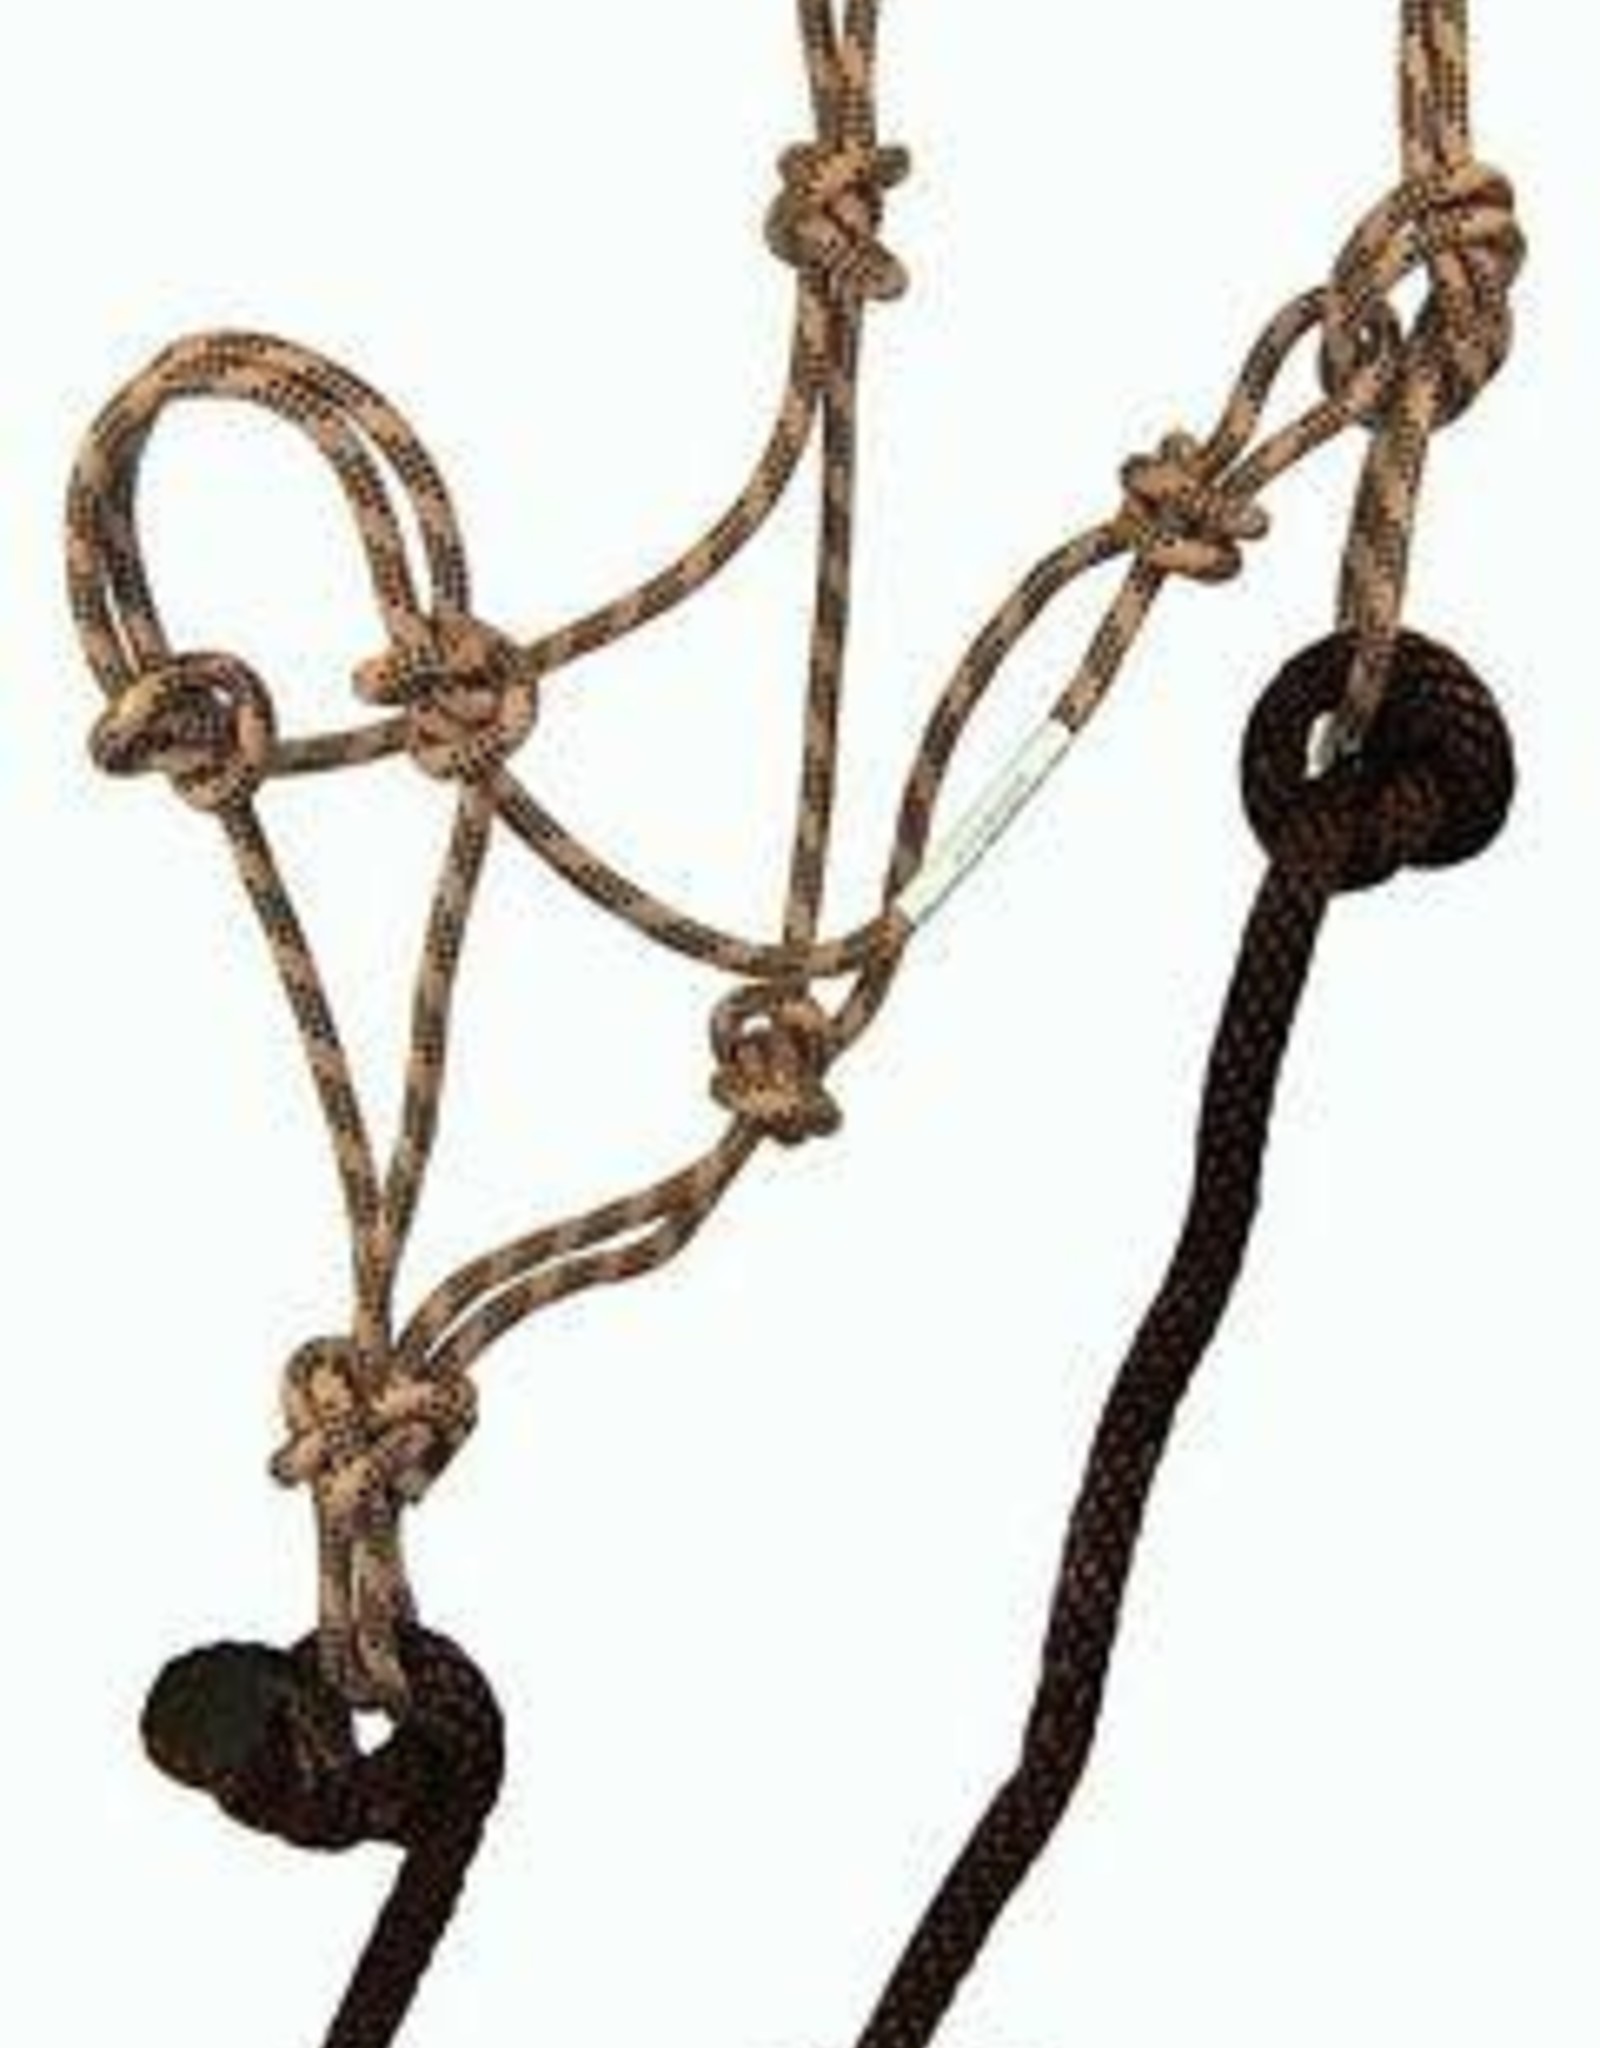 Hamilton Pet HALTER HORSE ROPE WITH LEAD 8FT BROWN TAN